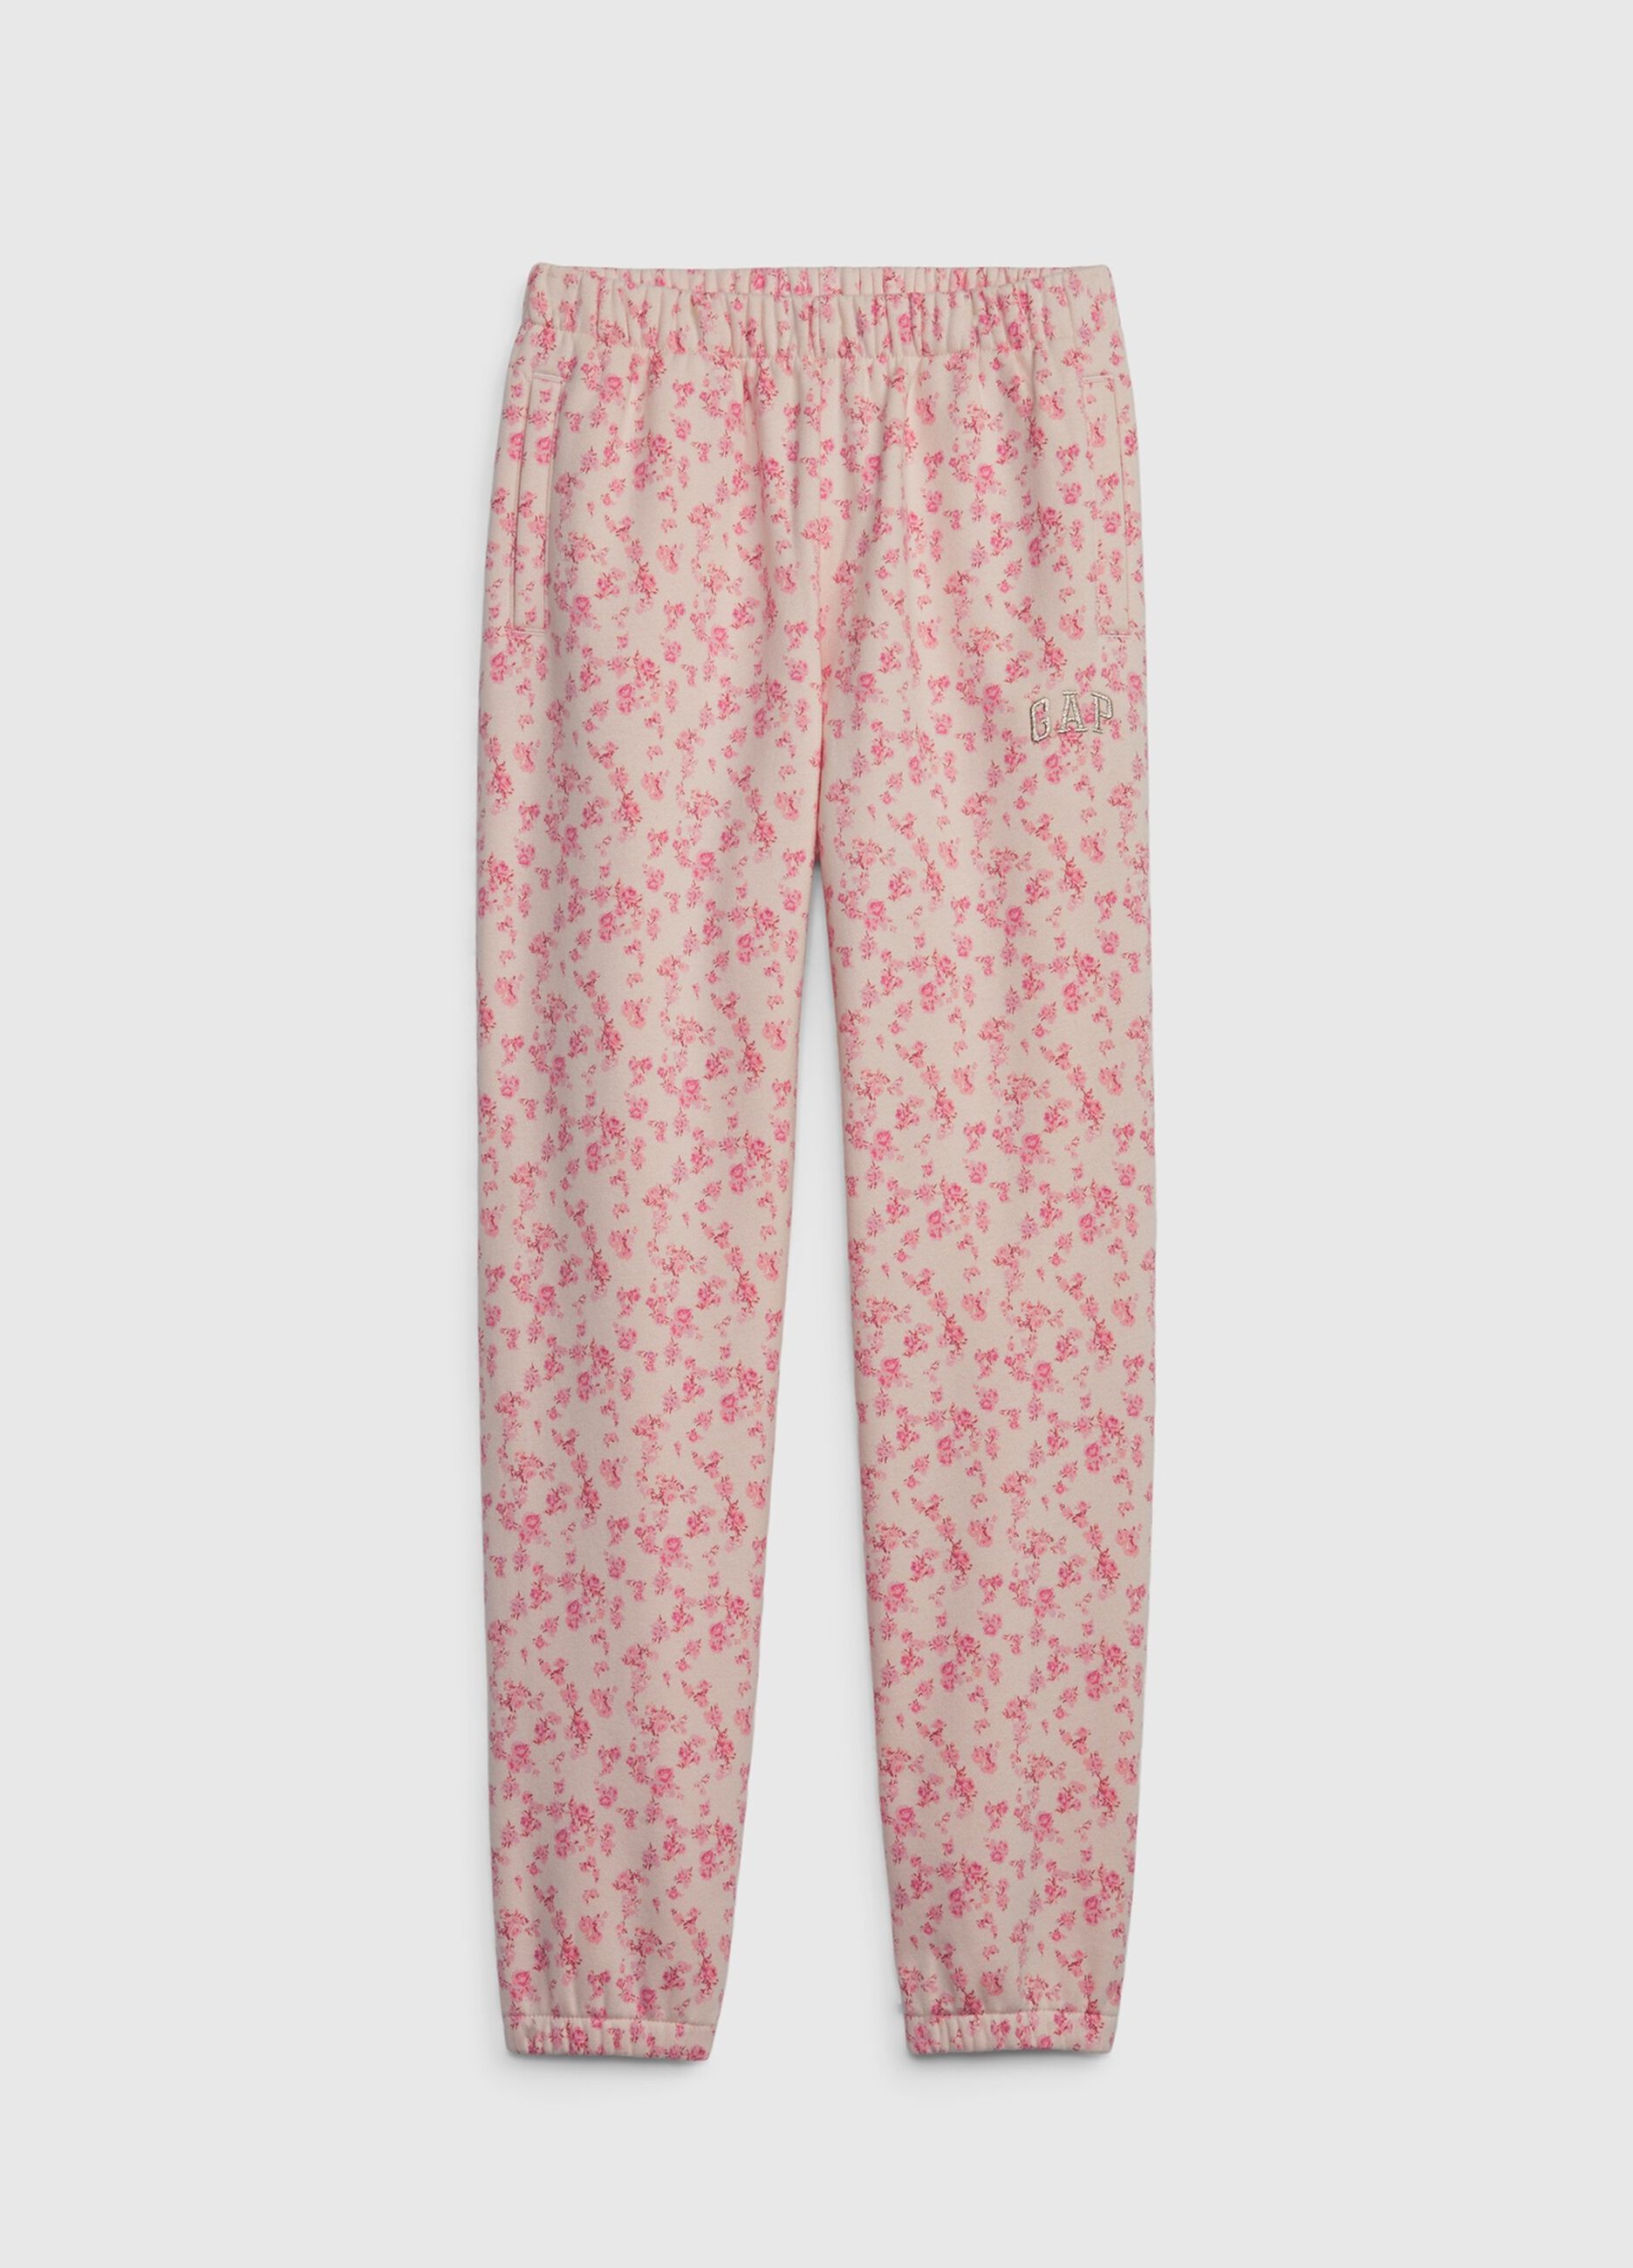 LoveShackFancy floral joggers with logo embroidery